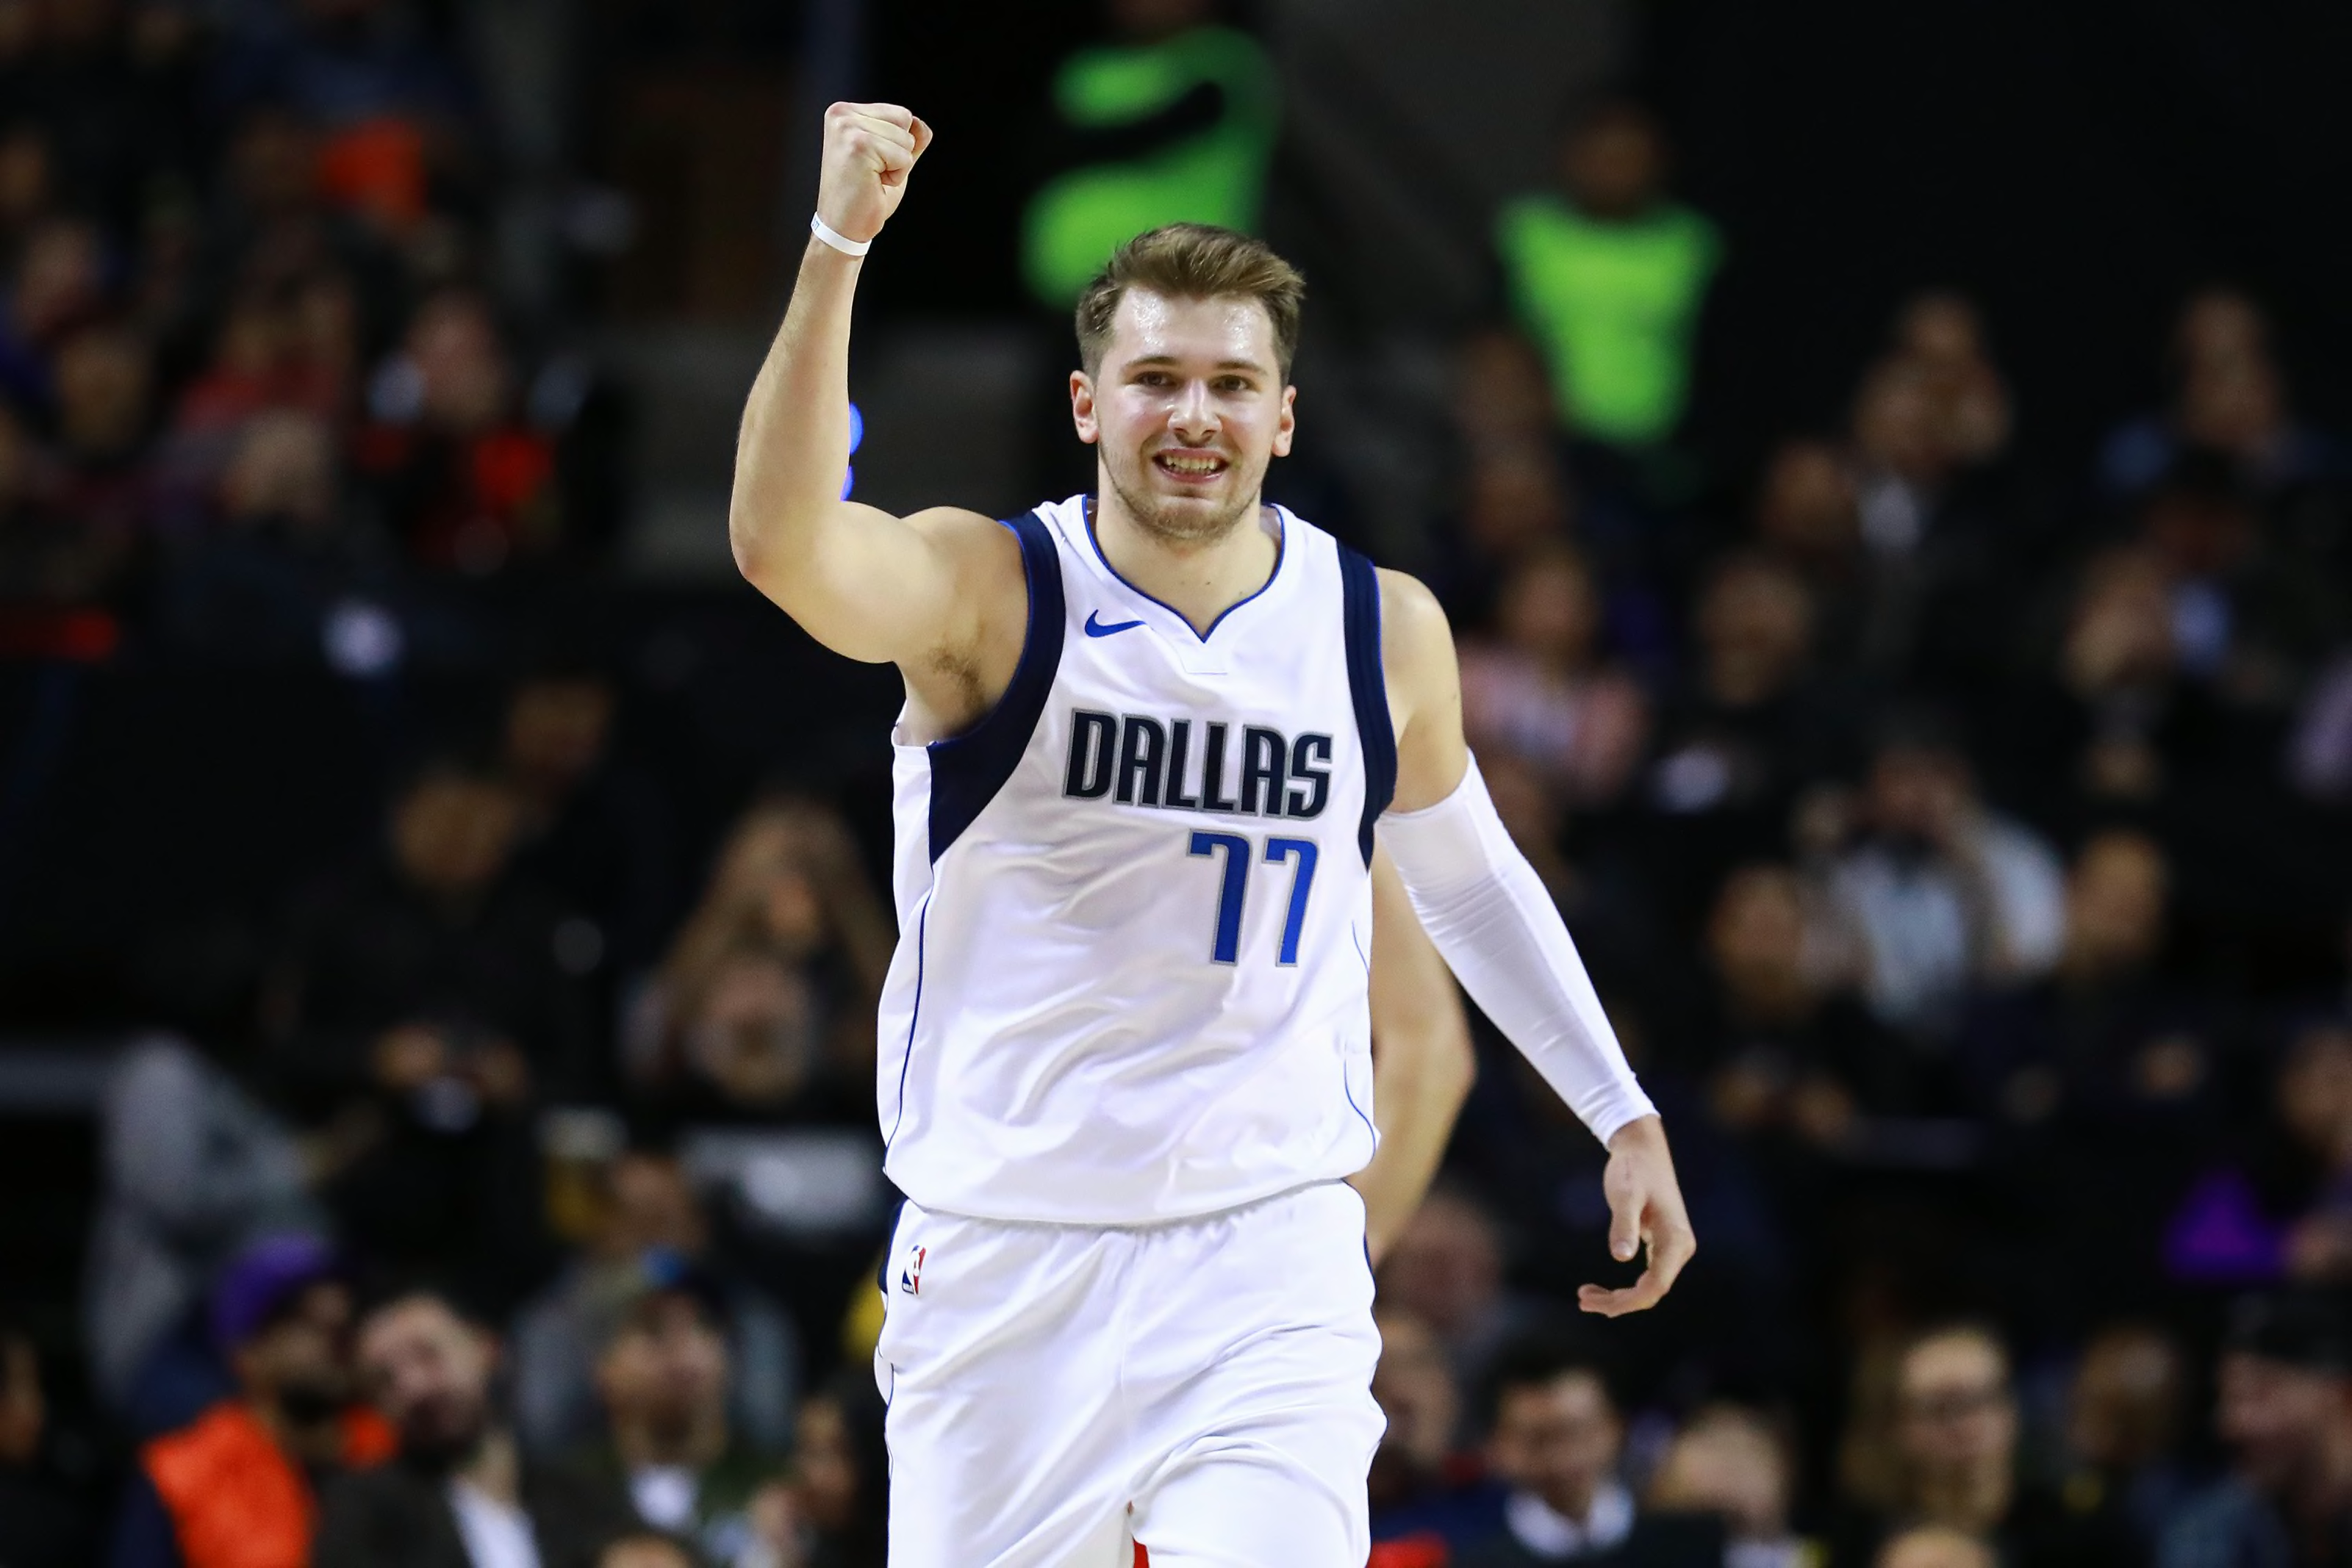 Dallas Mavericks: Why Luka Doncic should win Most Improved Player - Page 2